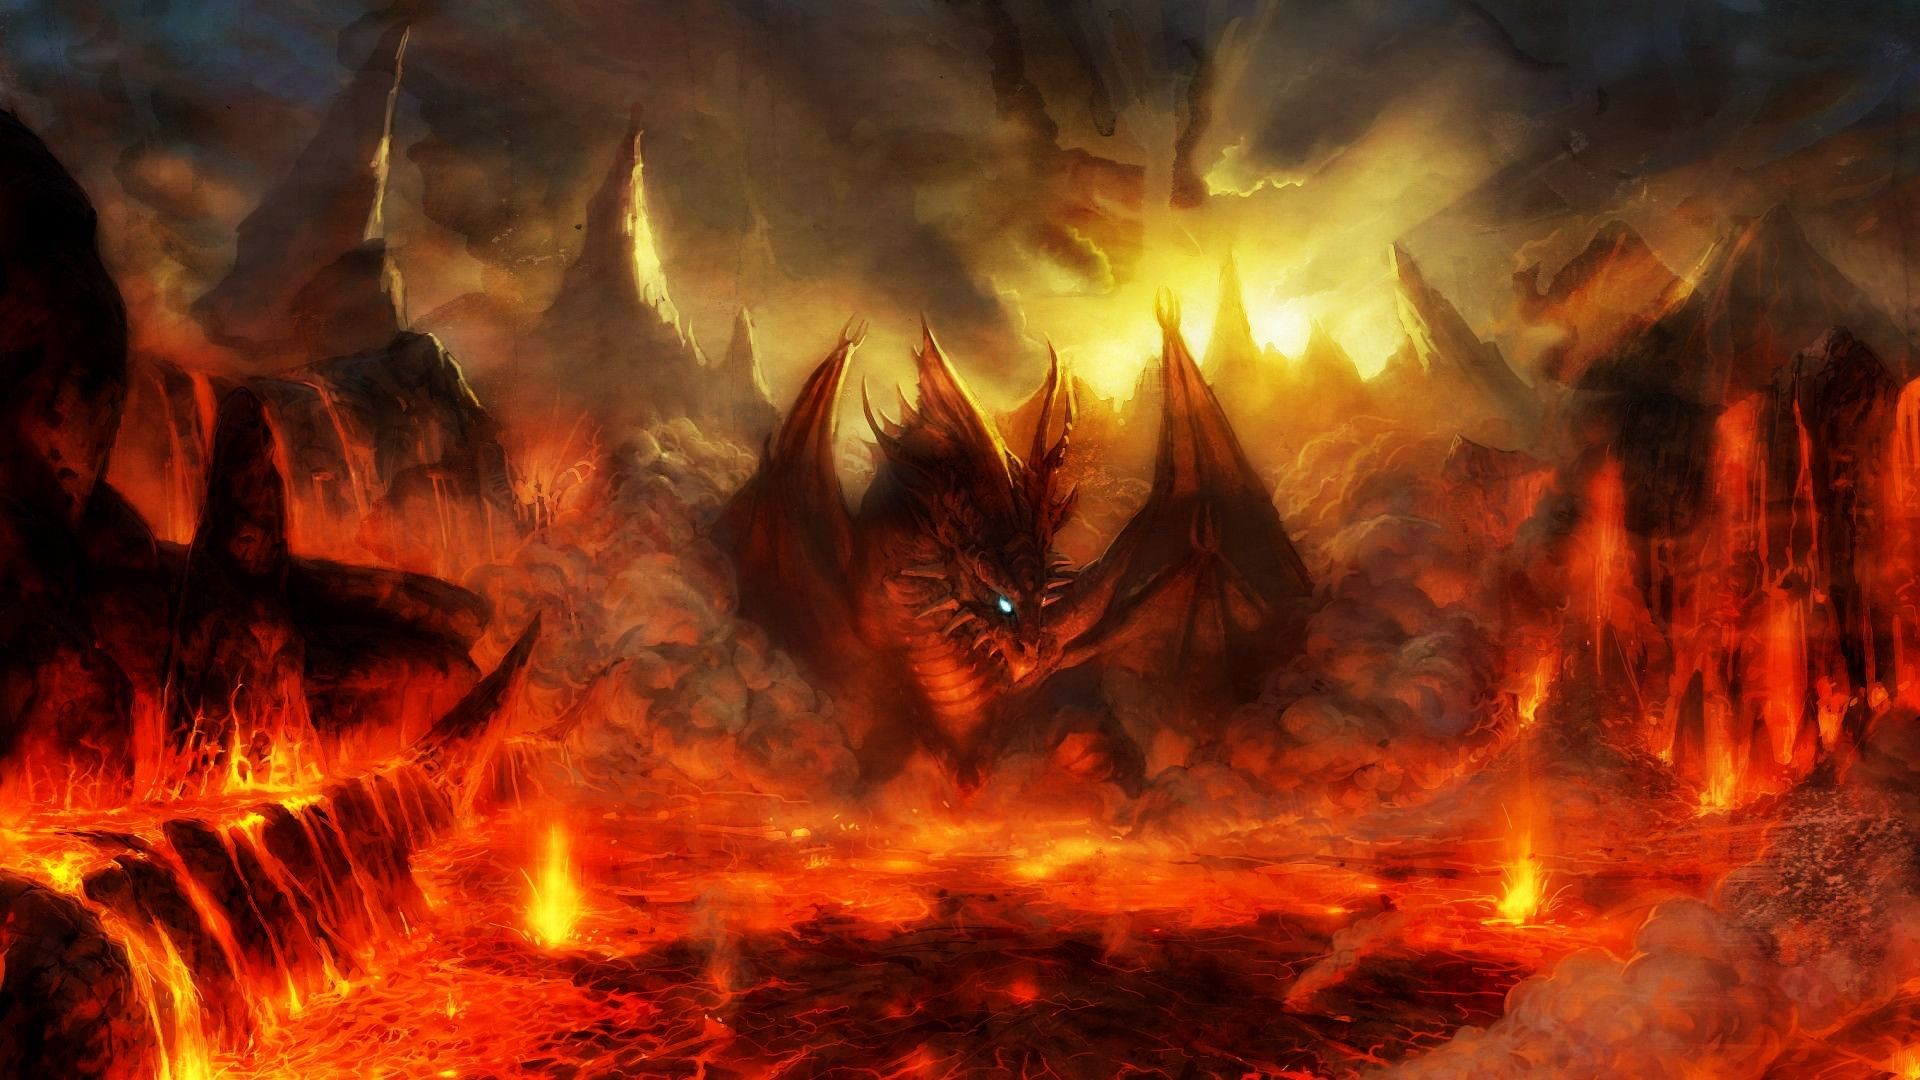 1920x1080 hell's images | Free Wallpapers - Dragon in the flame of hell   wallpaper